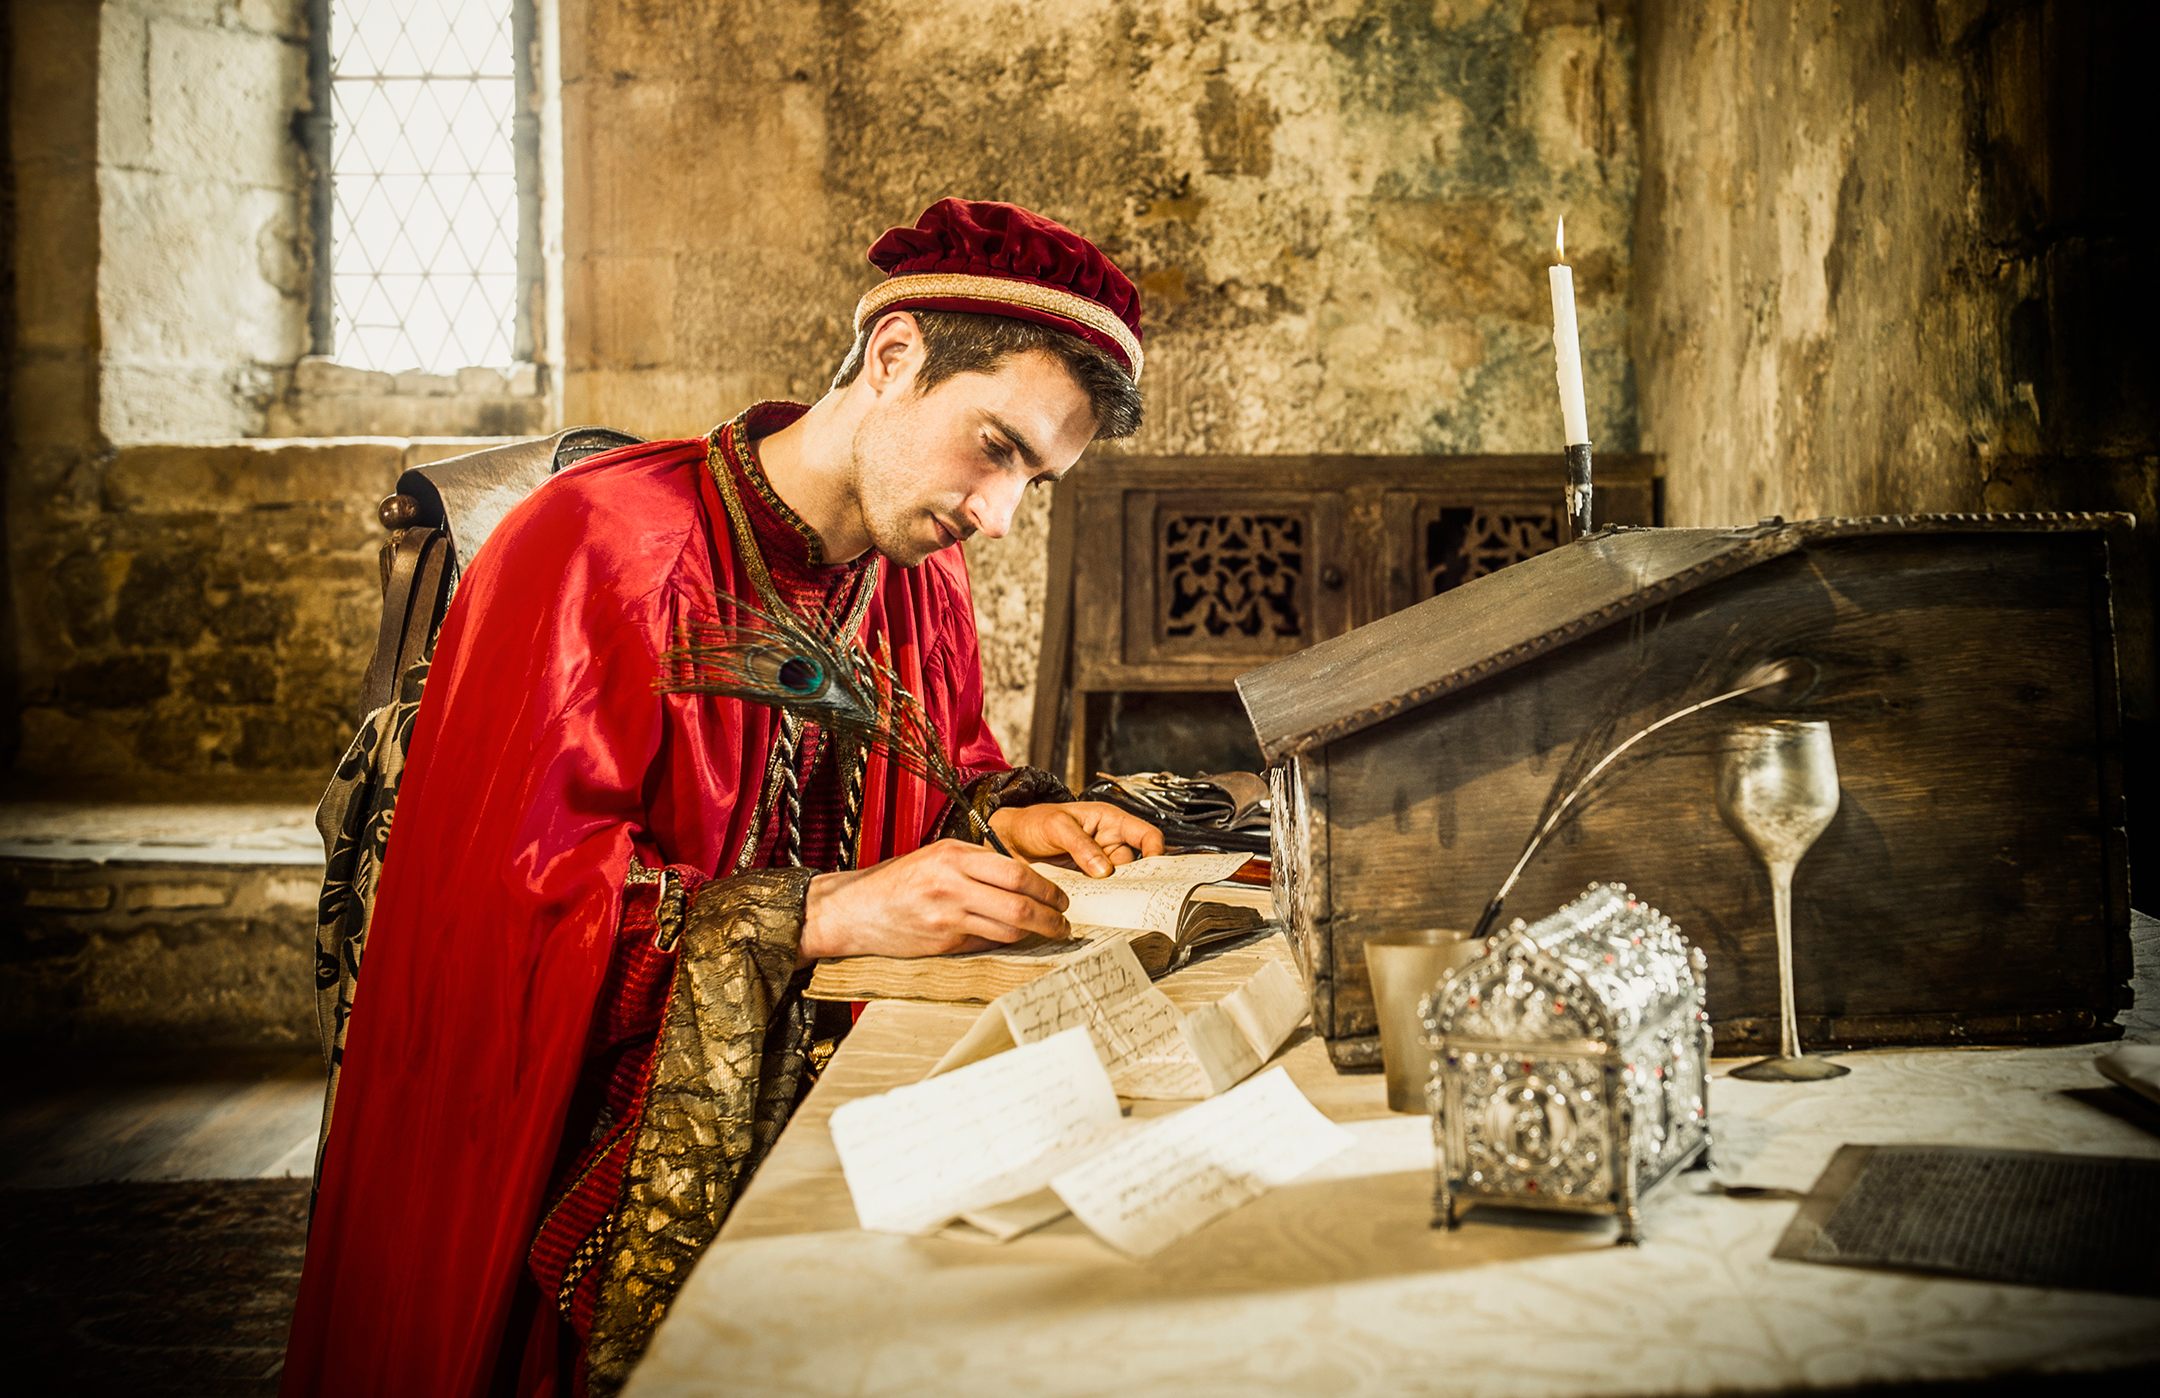 Caucasian man in medieval costume reading in castle and writing with a quill pen